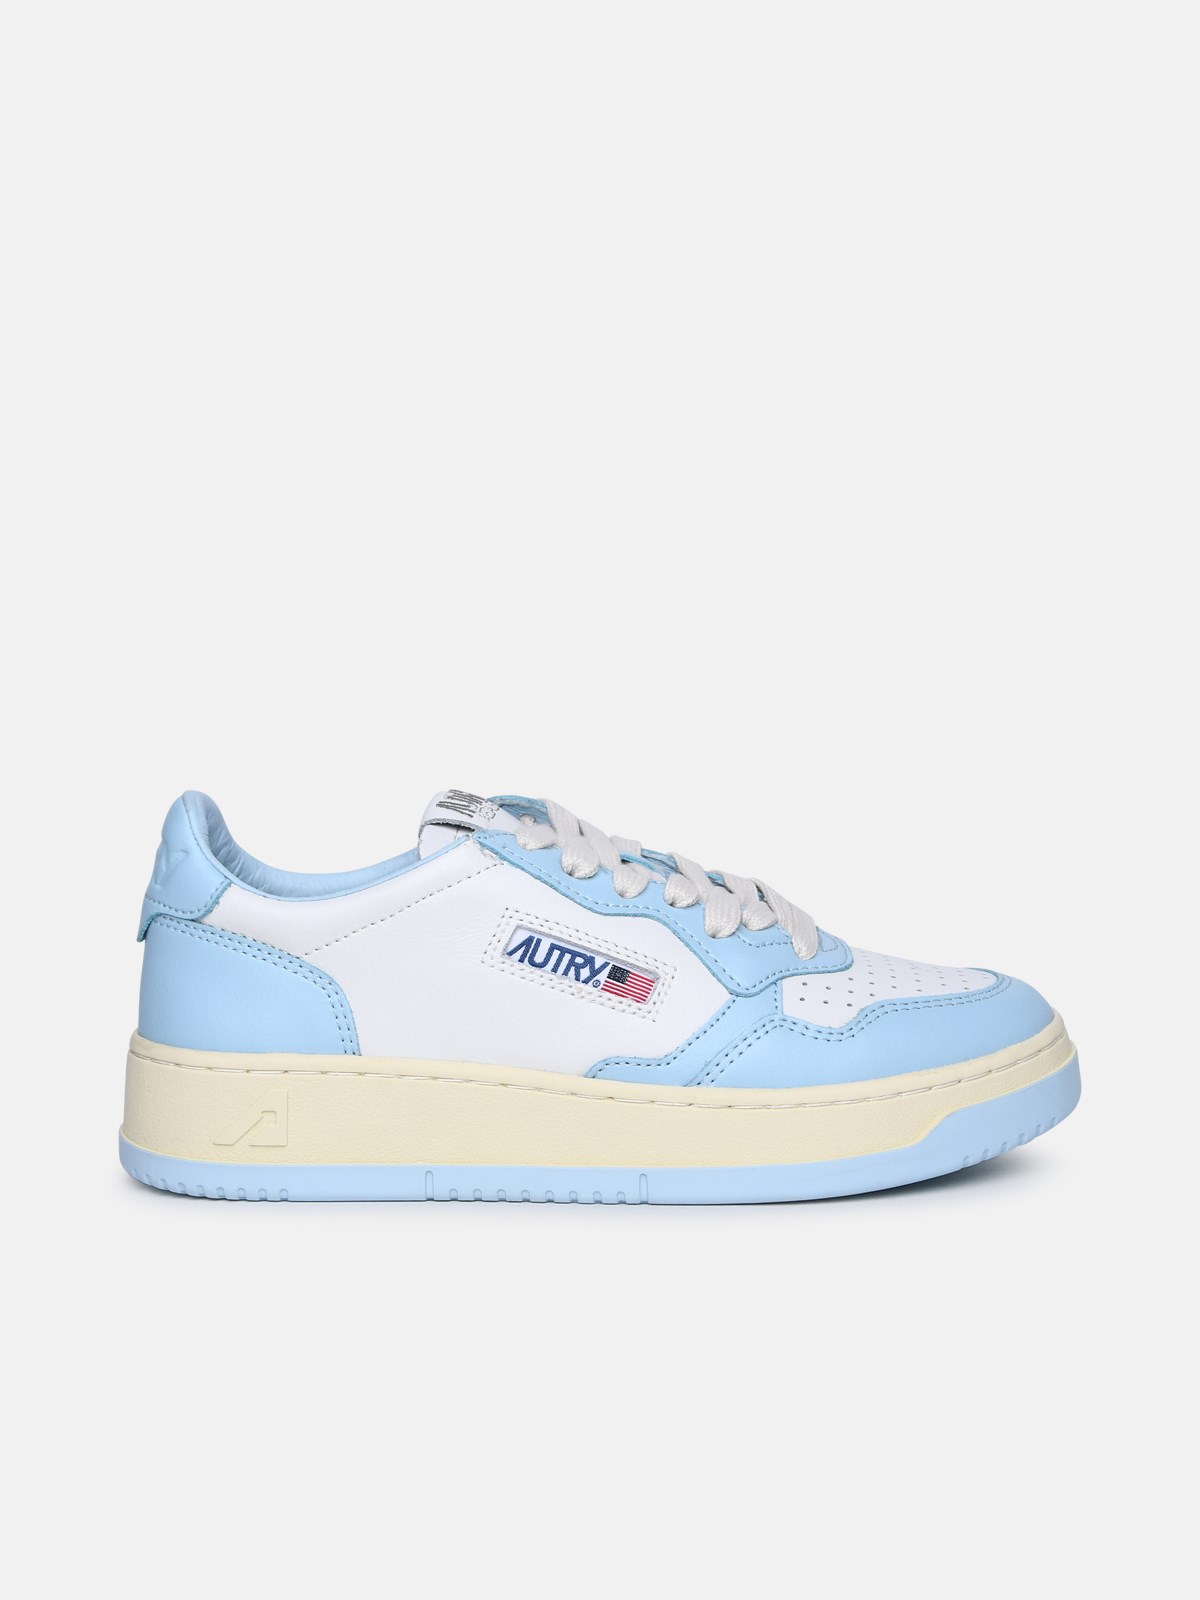 Autry 'medalist' Light Blue Leather Sneakers